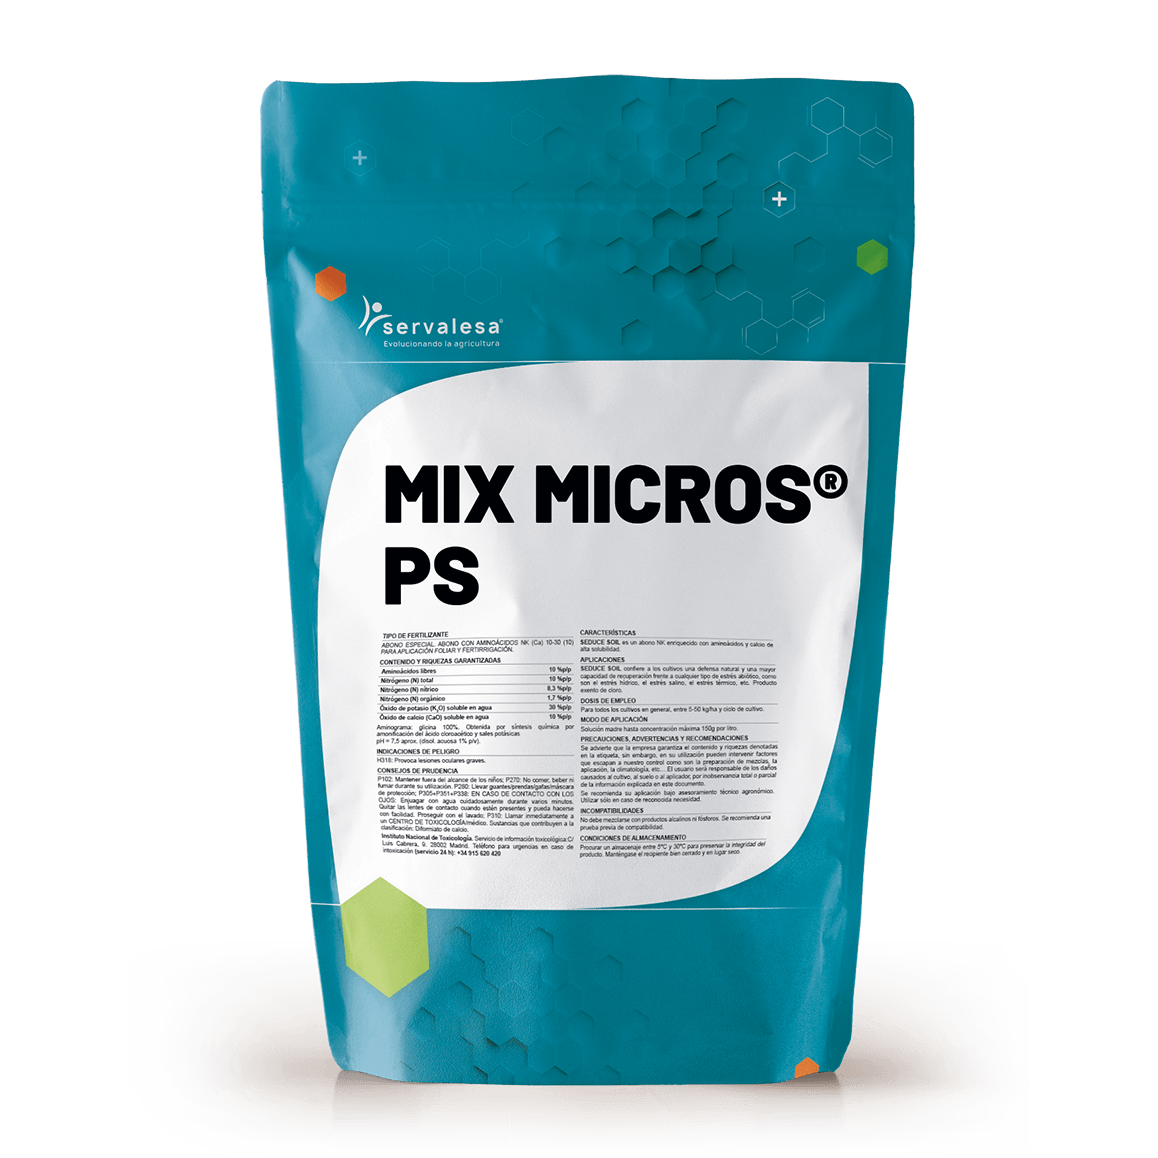 MIX MICROS® PS